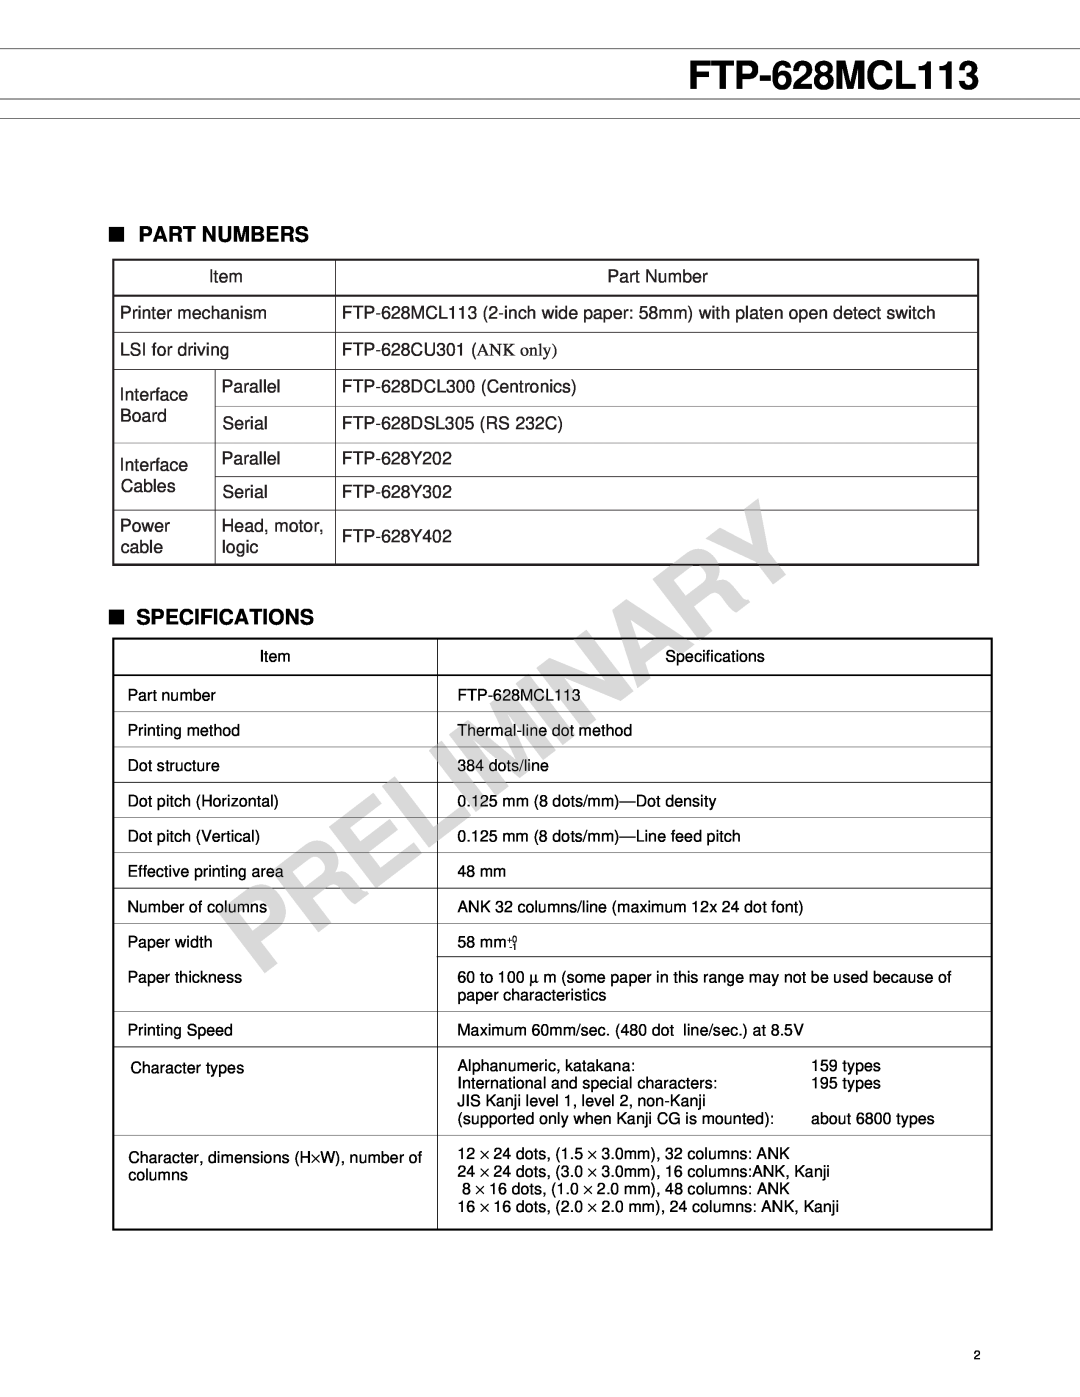 Fujitsu FTP-628MCL113 manual Part Numbers, Specifications 